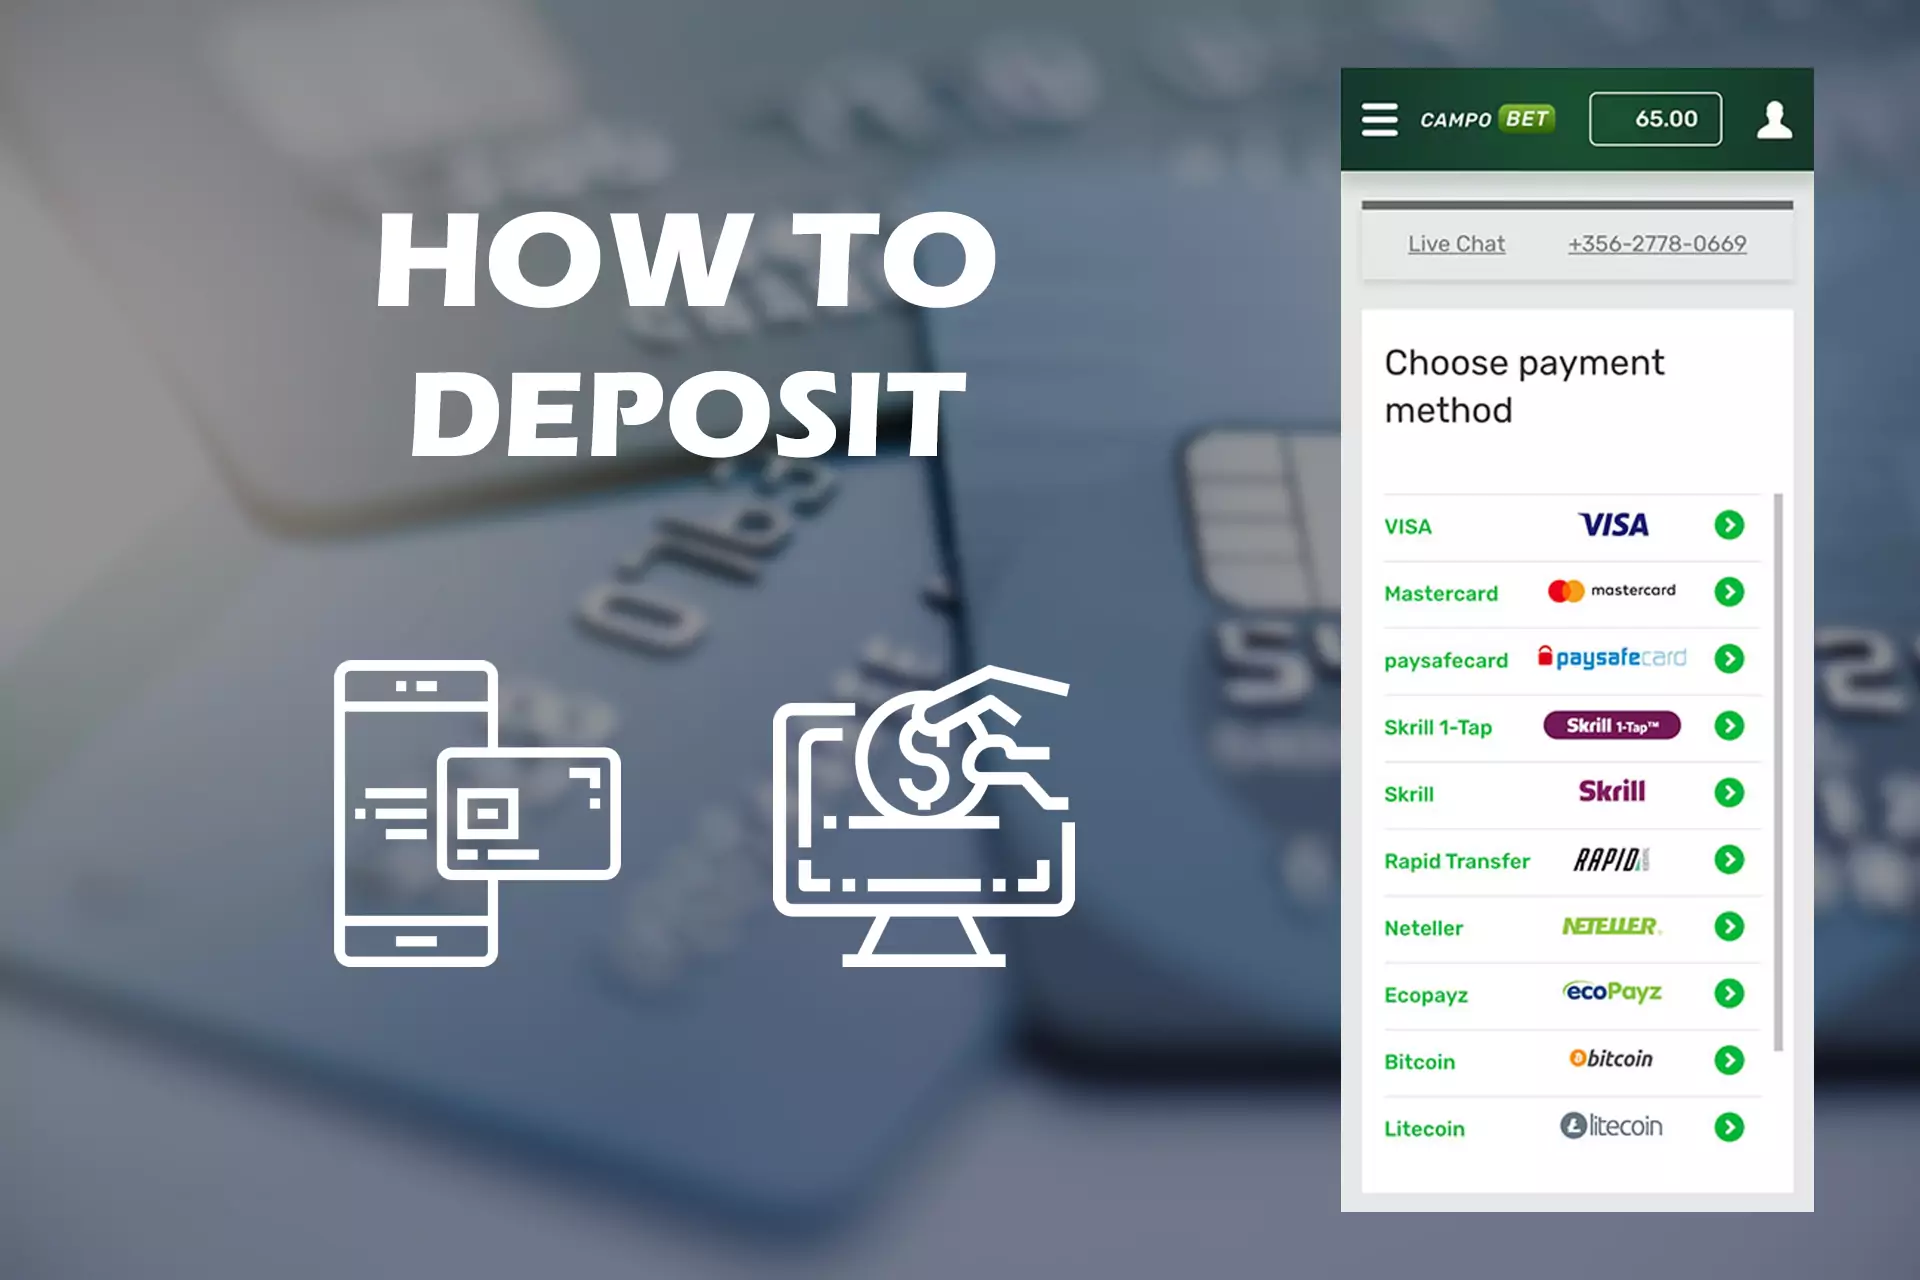 Using online banking you can deposit to most of the bookmakers.